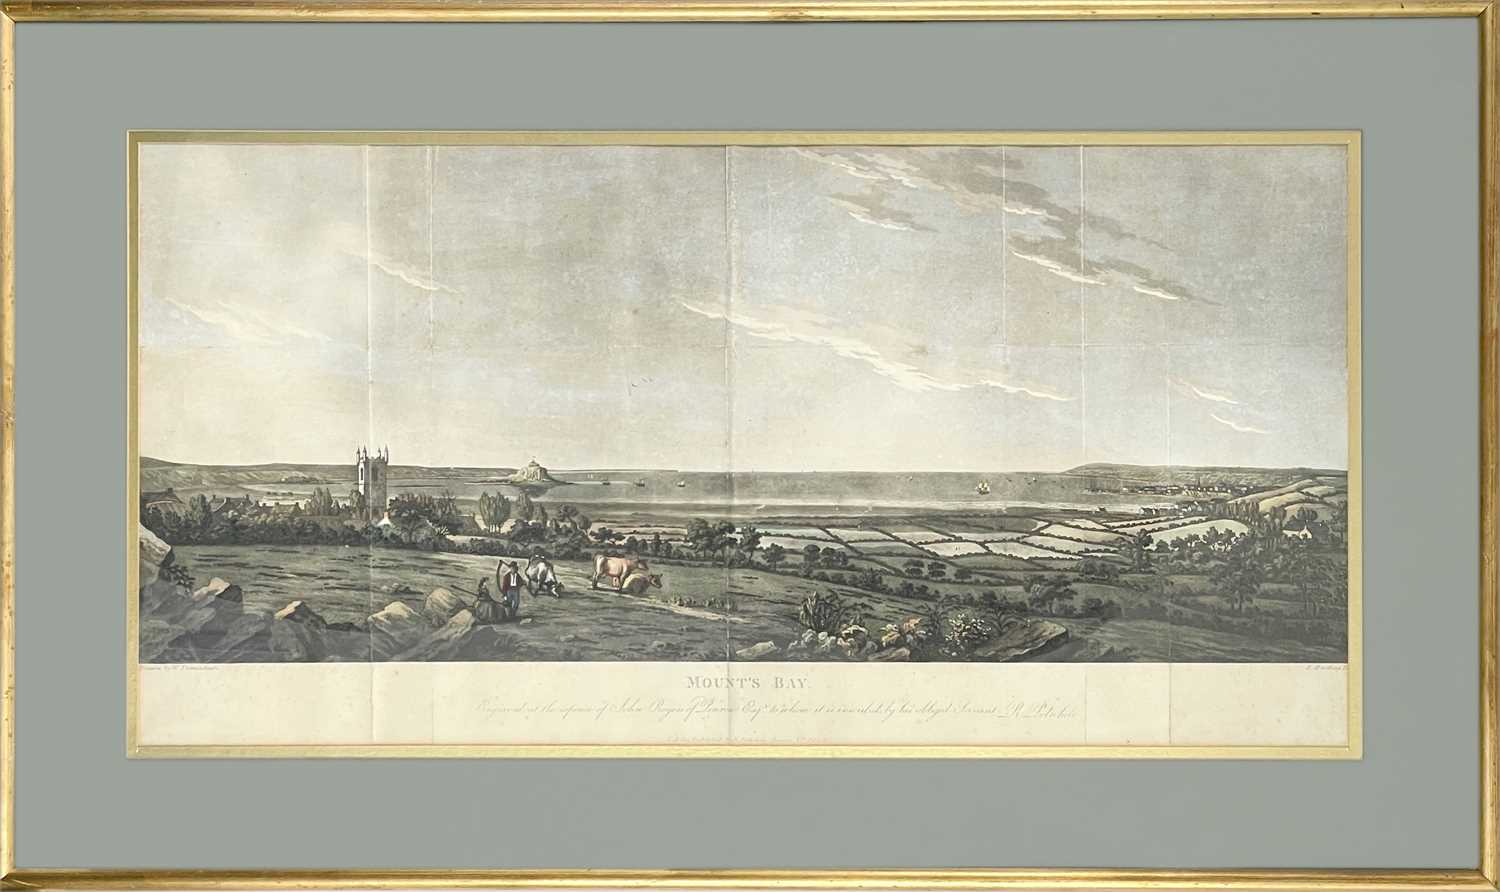 Mount's Bay, 1804 Engraving, drawn by W. Tremenheere - Image 2 of 3